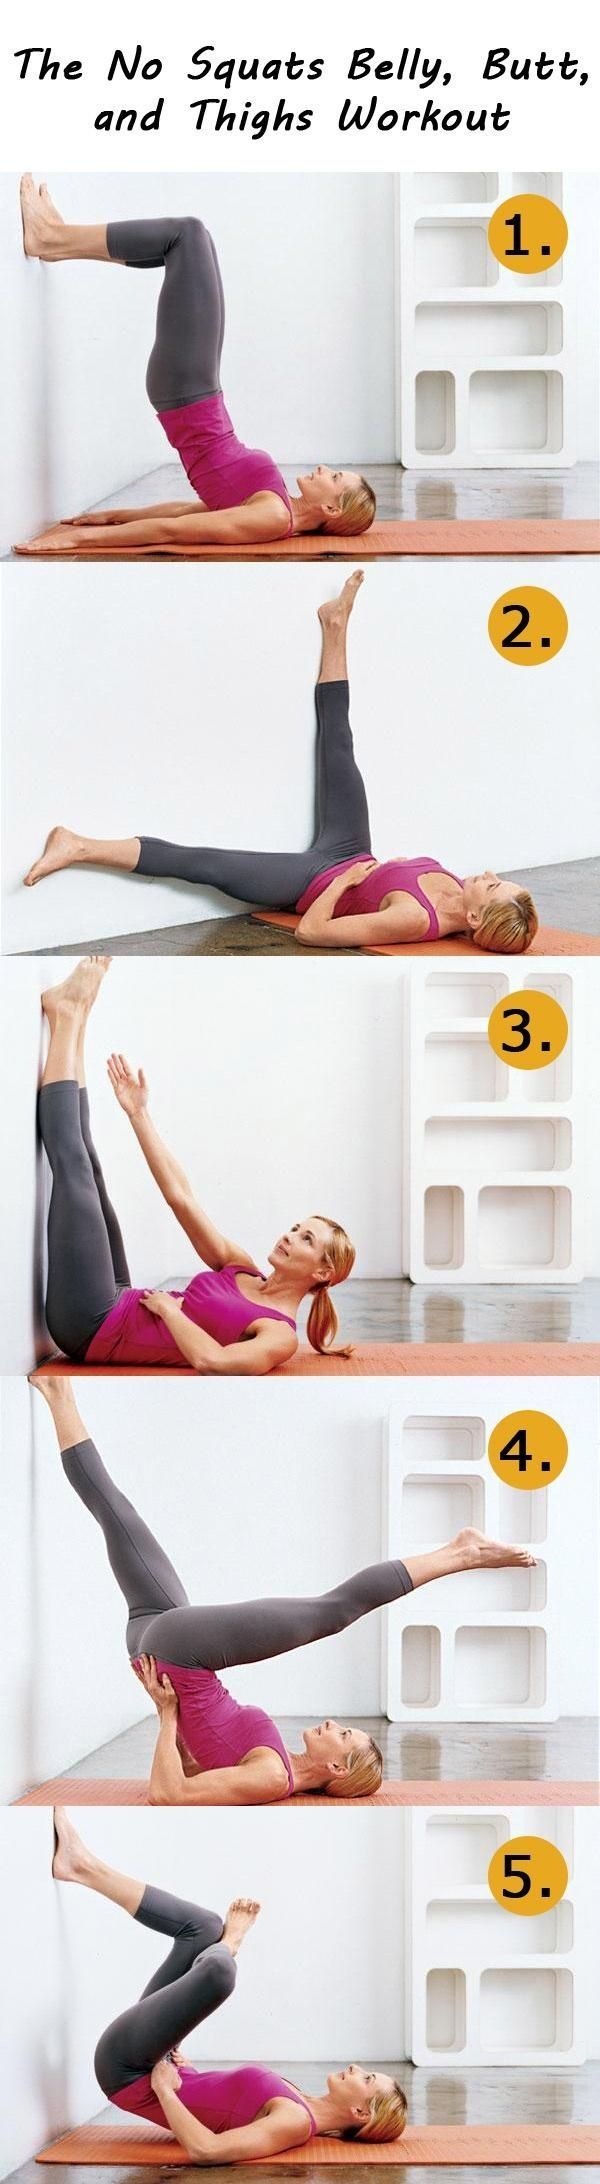 With this workout routine you will be able to flatten your belly, slim your thighs